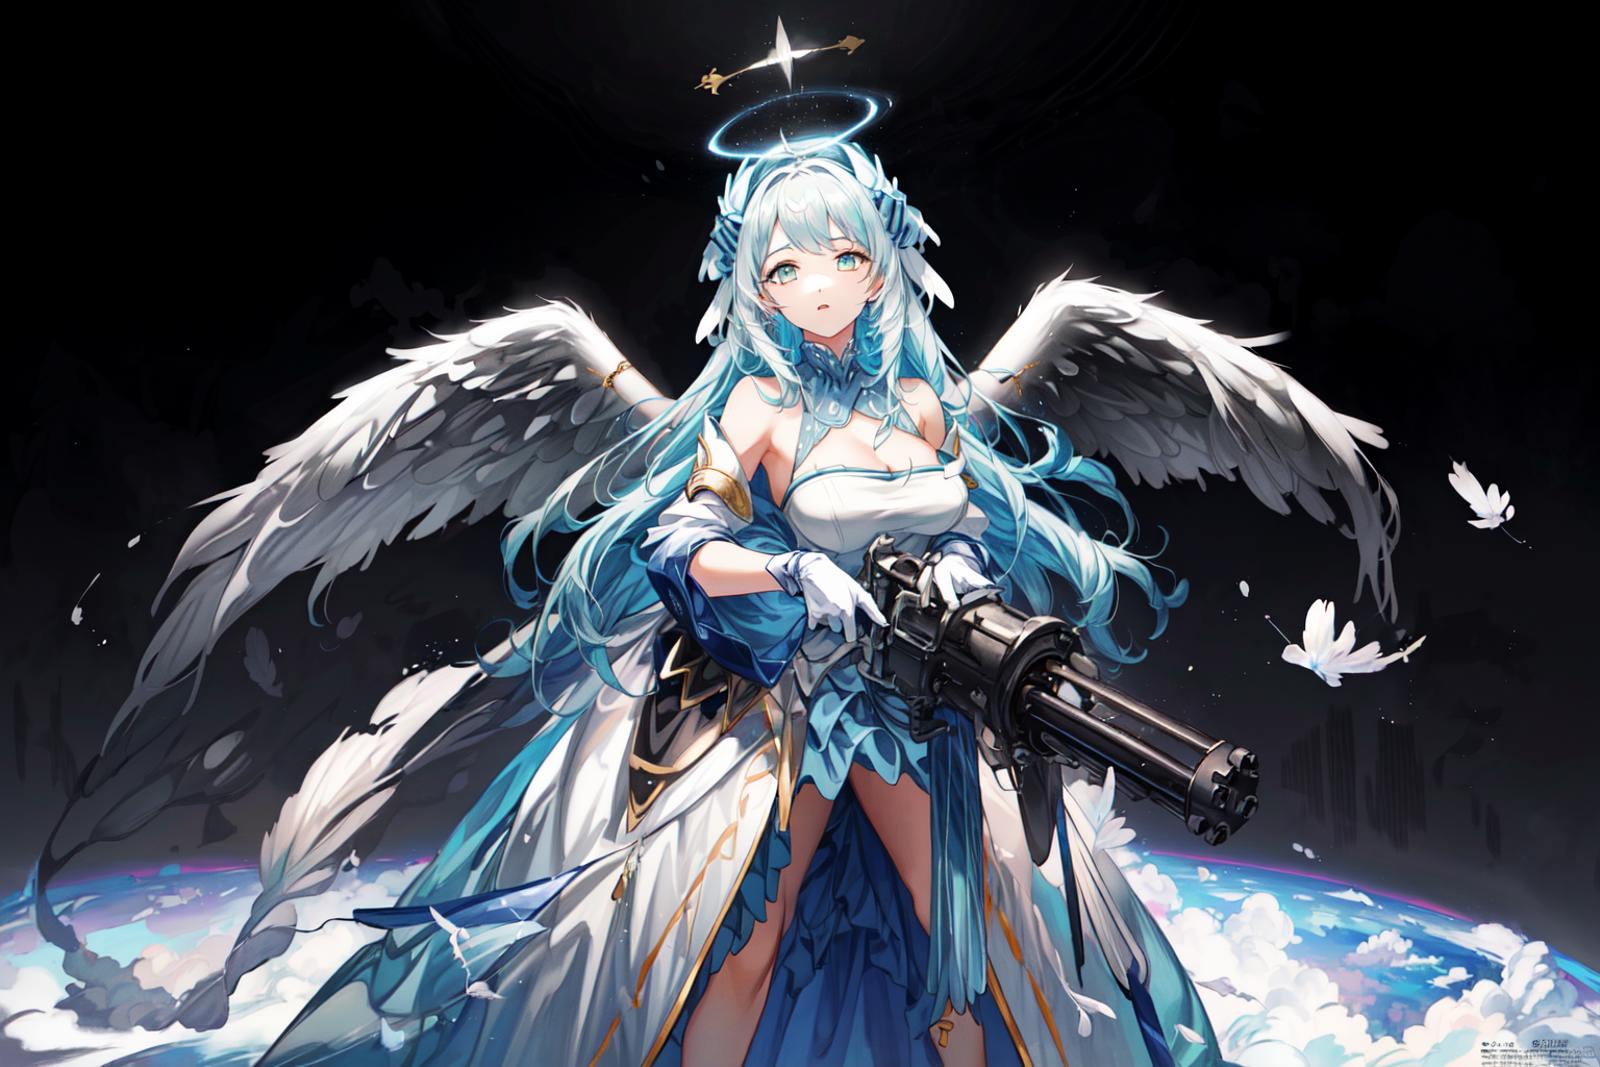 Change-A-Character: Angel-ify Your Waifu Today! image by ChaosOrchestrator